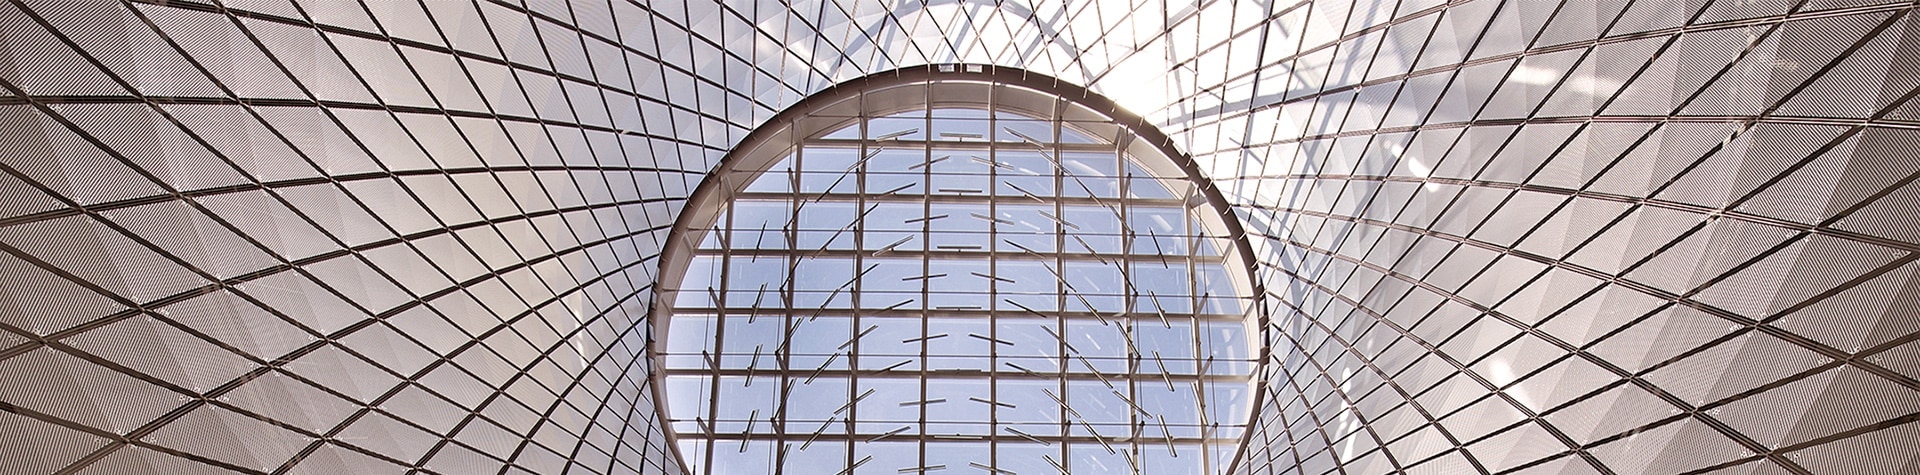 Permanent glass and steel artwork creating a skylight at the Fulton Center Transit Center.